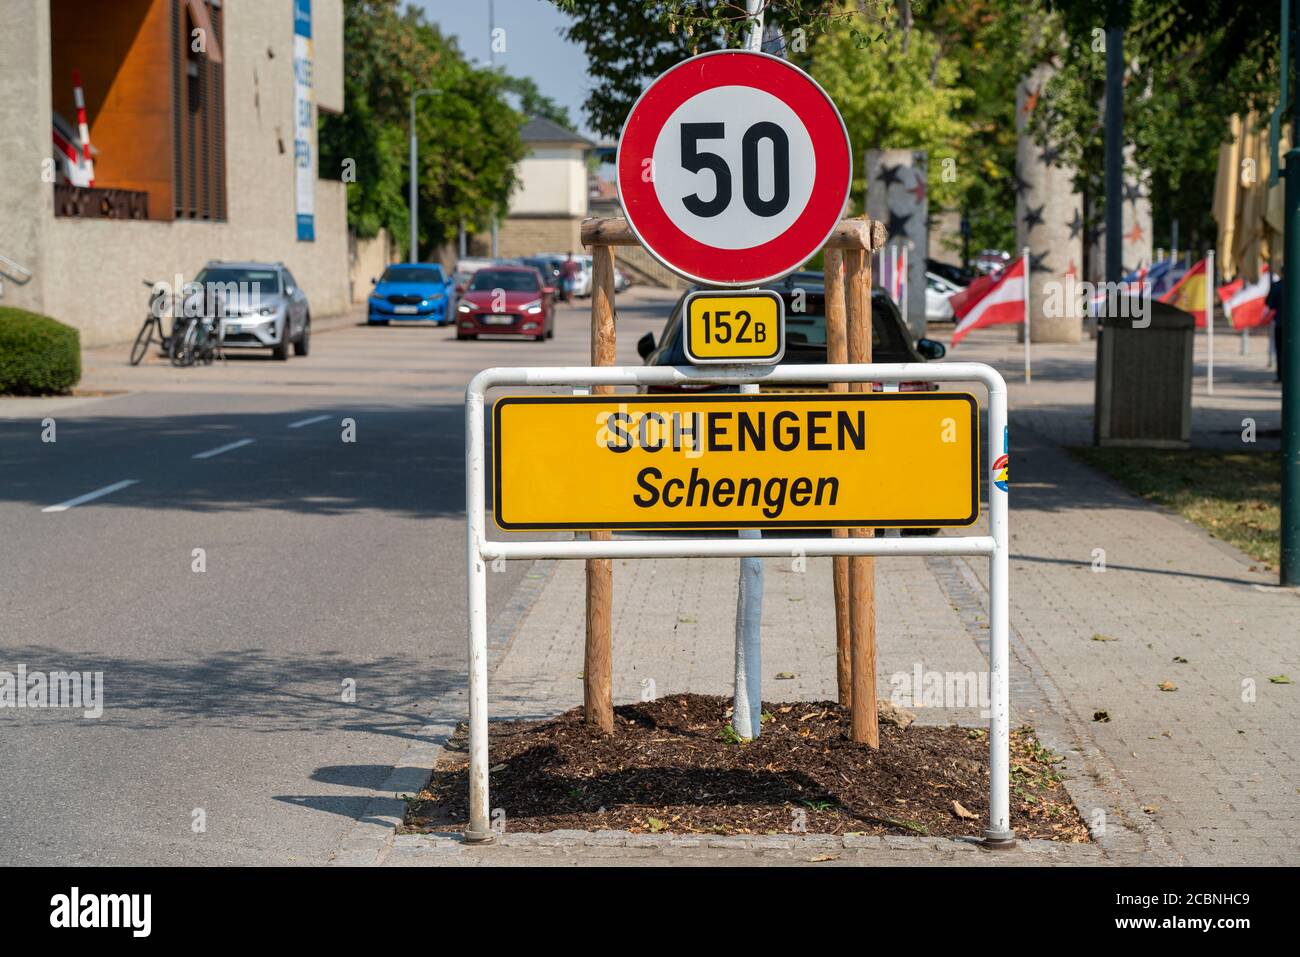 The town of Schengen, on the Moselle, in the Grand Duchy of Luxembourg, where the Schengen Agreement of 1985 was signed, town sign, Stock Photo